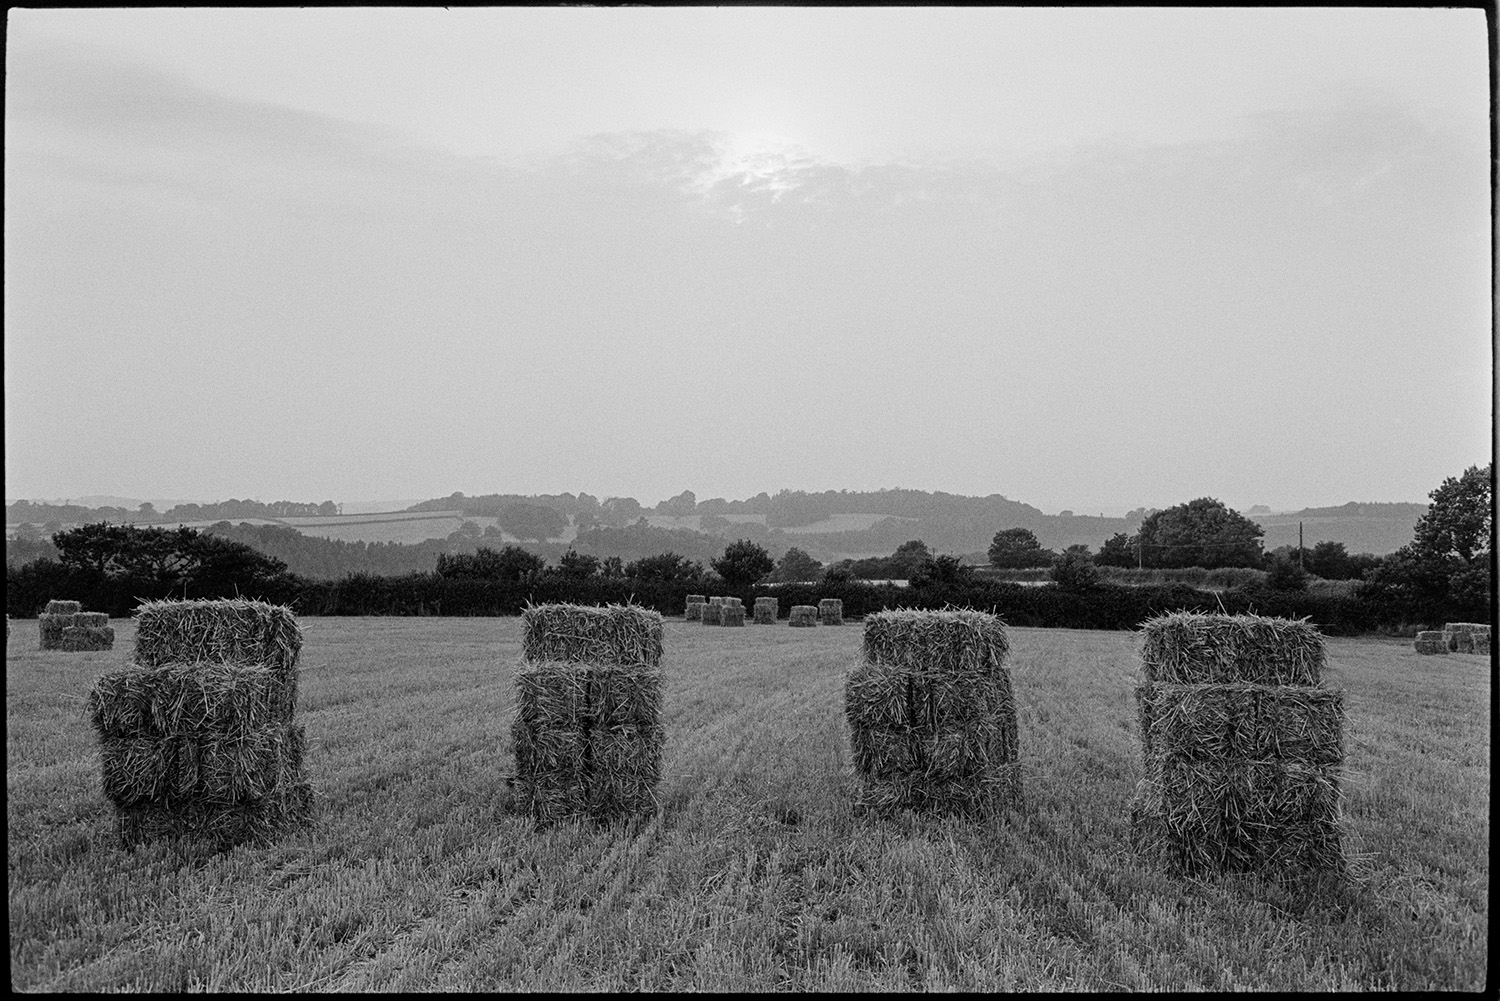 Straw bales in field. 
[Stacks of straw bales in a field at Dolton. A landscape of trees and field is visible in the distance.]